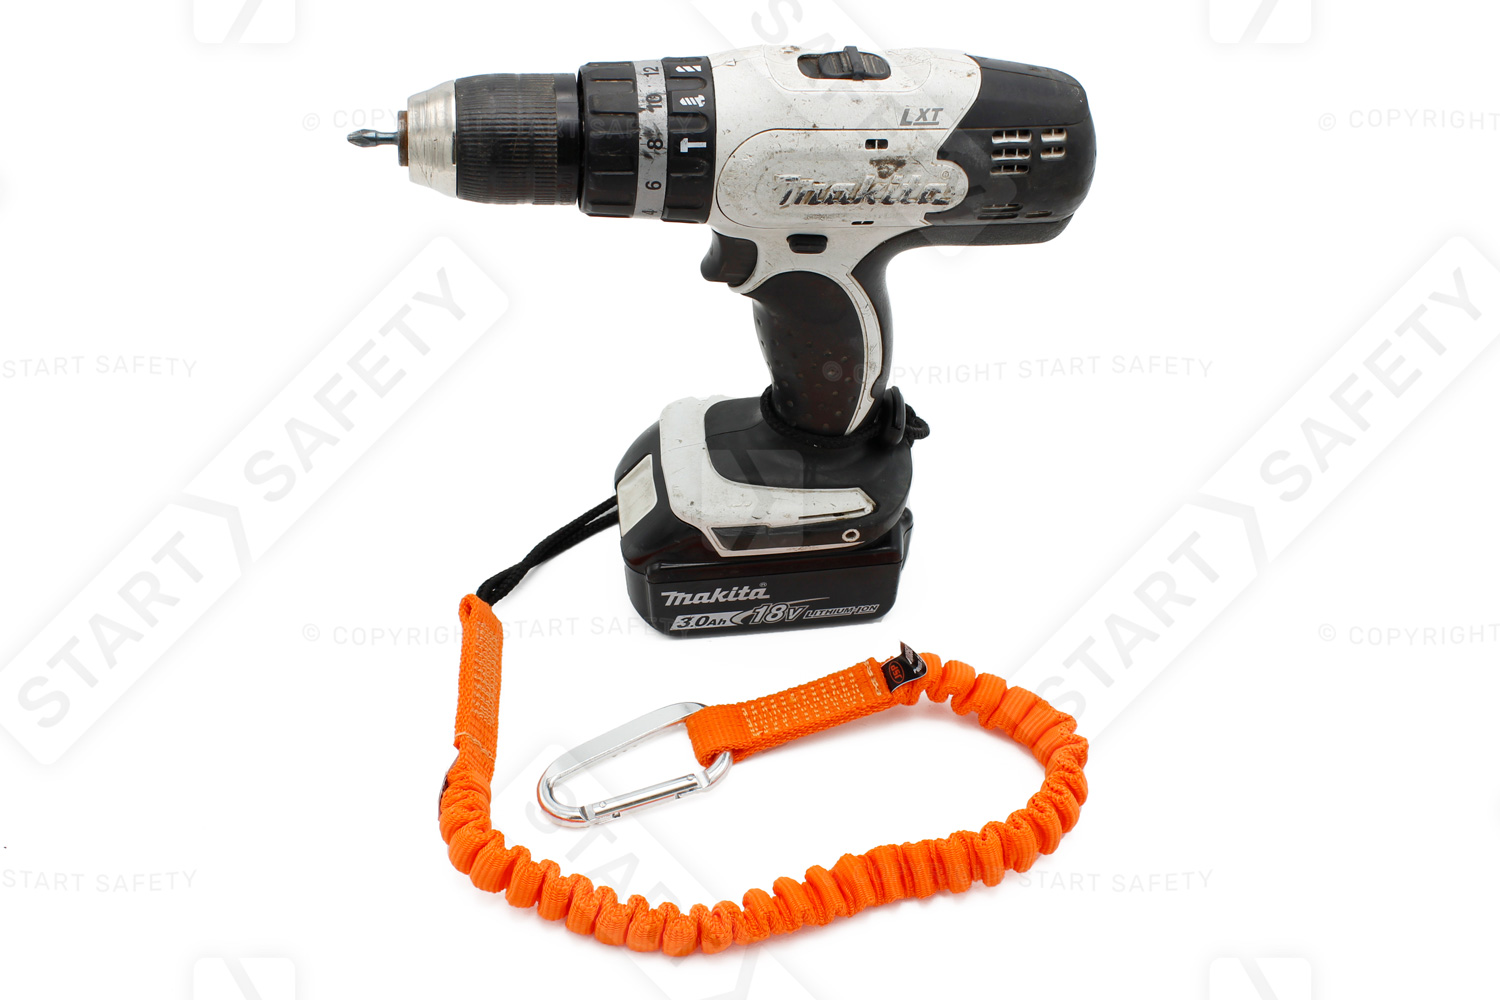 Power Drill Attached To A Tool Lanyard